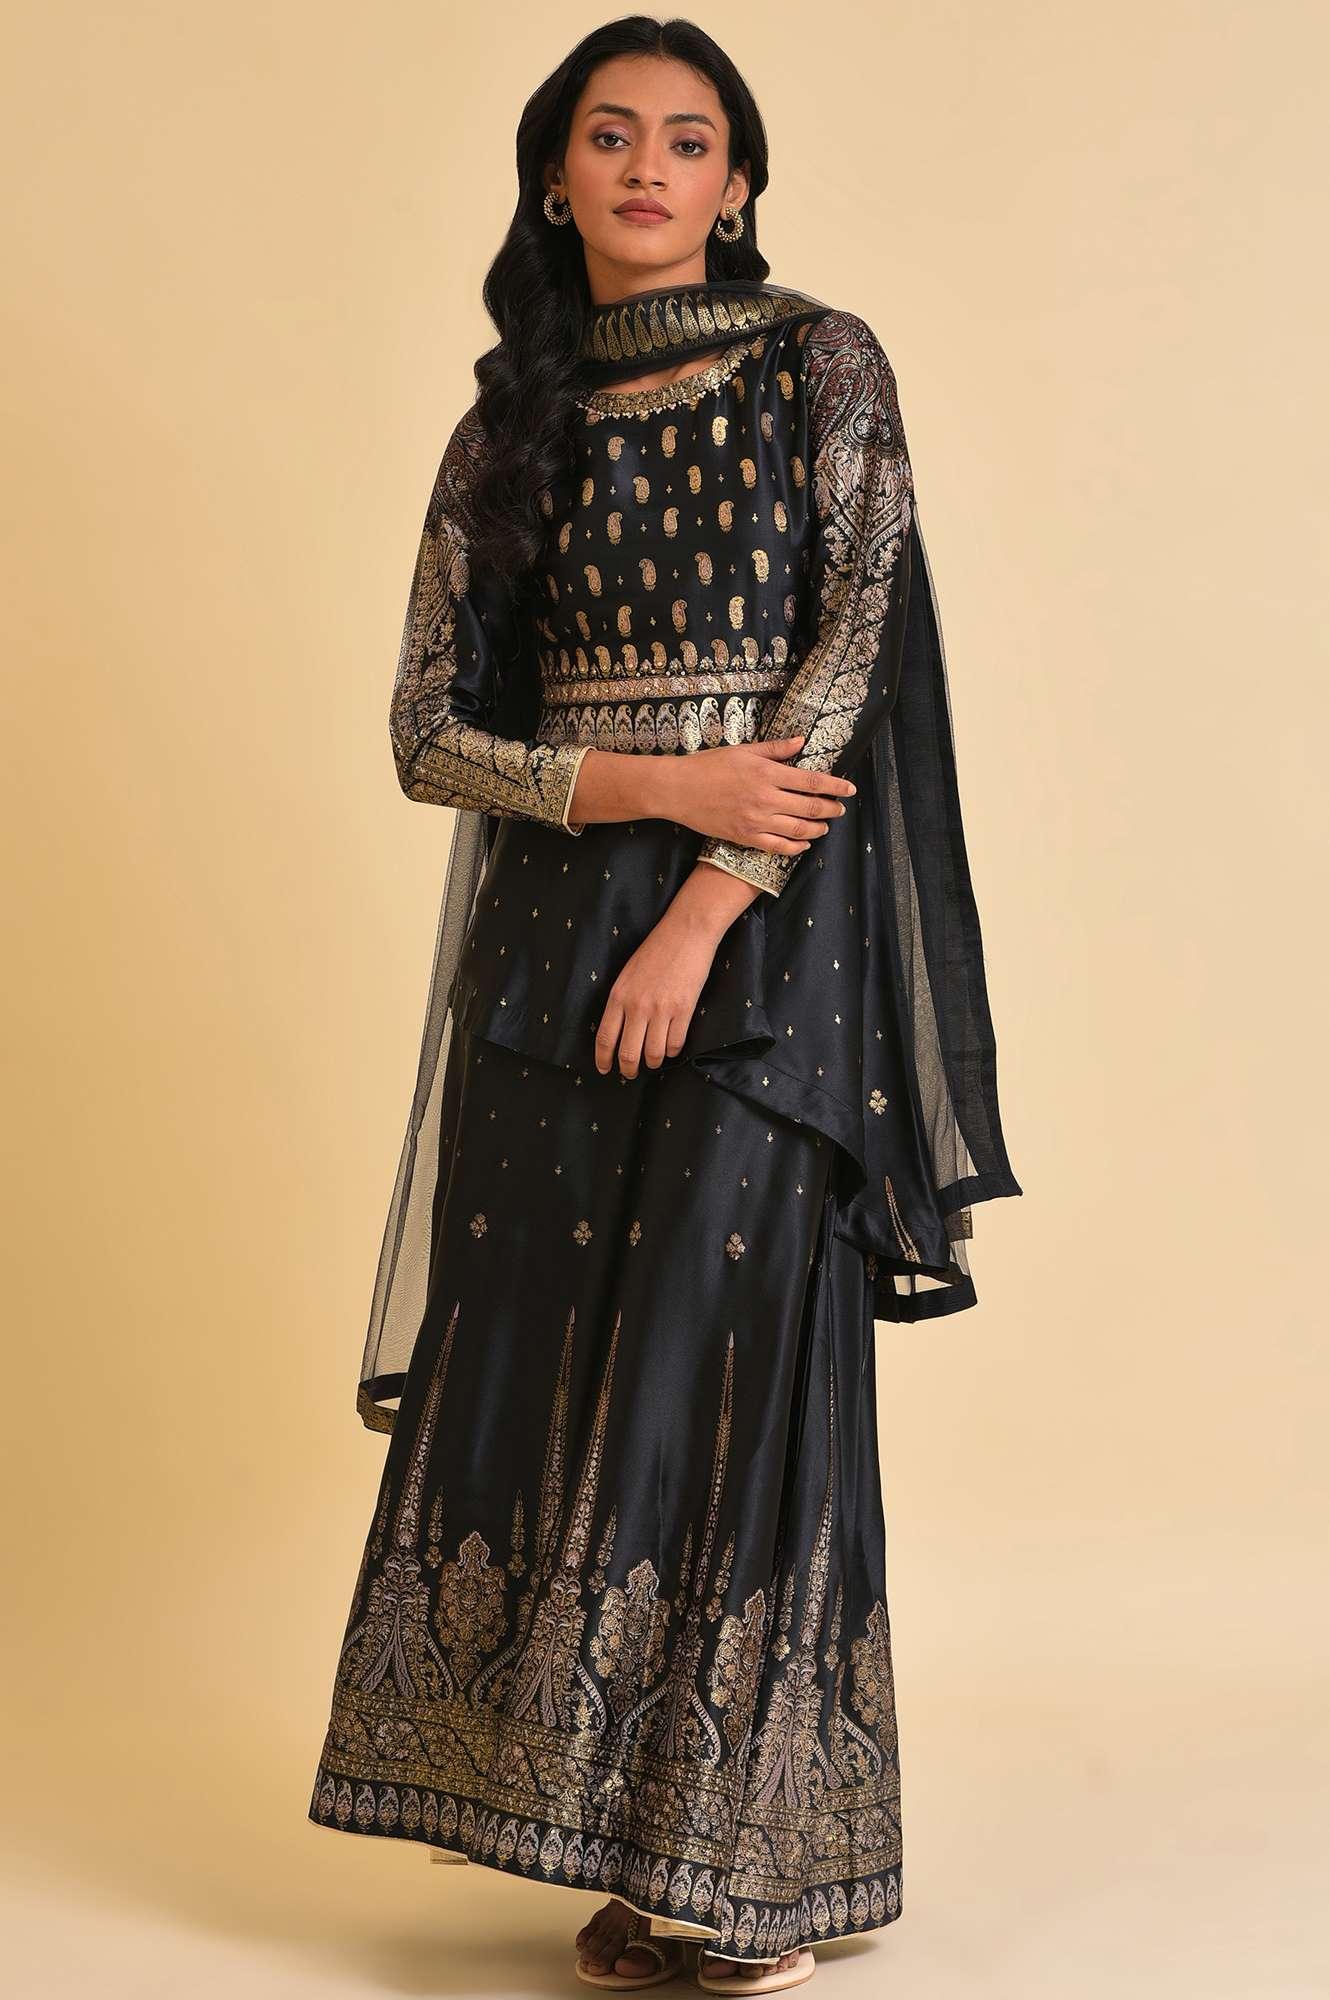 Black Satin Embellished Top With Skirt And Dupatta - wforwoman